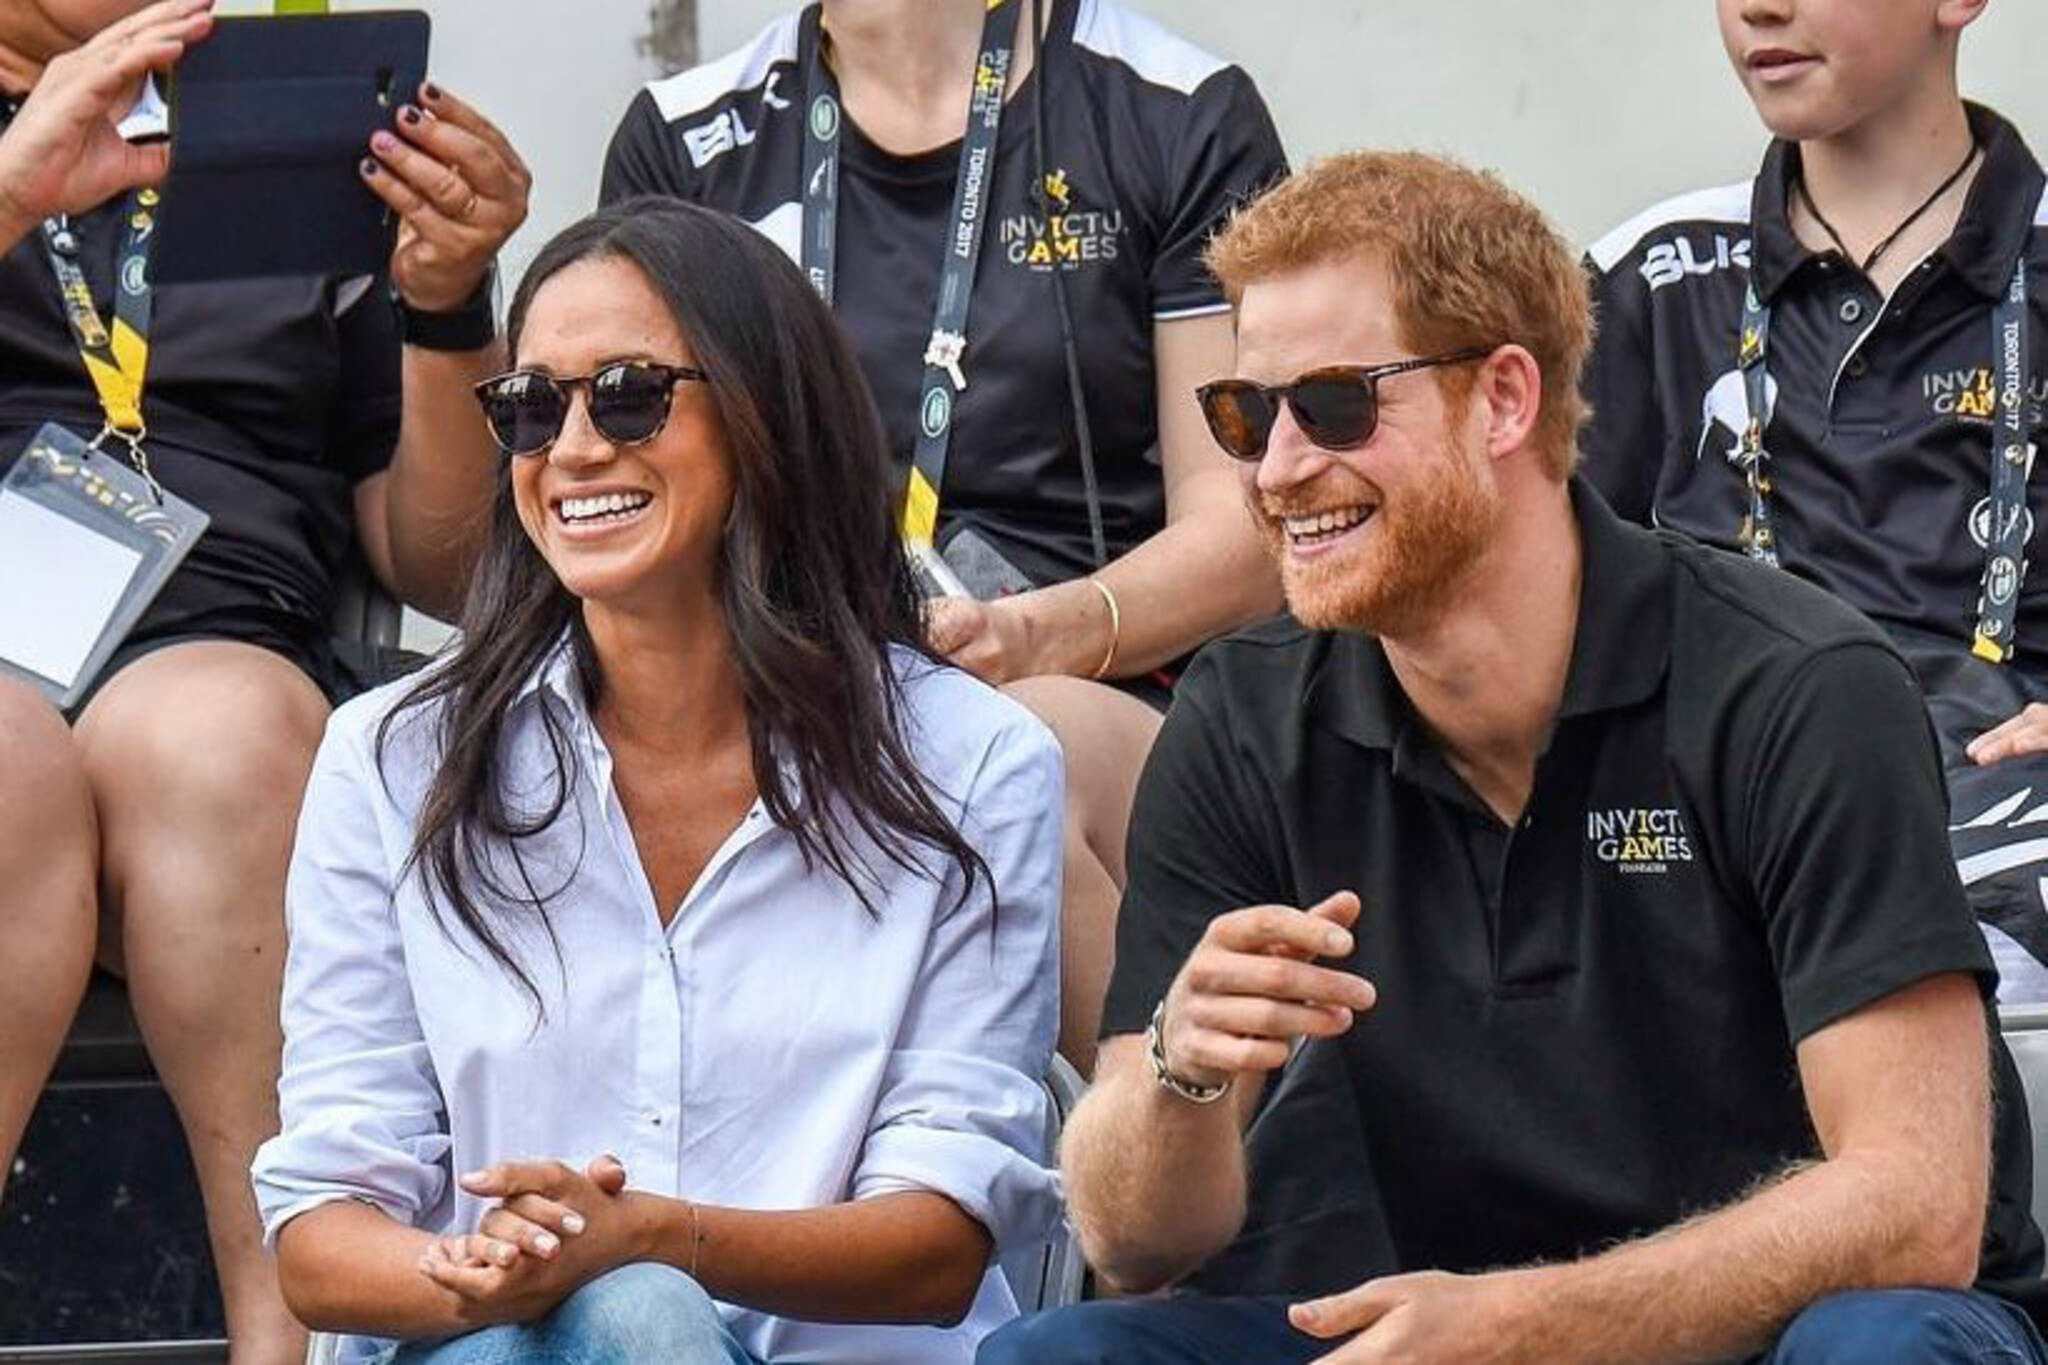 Toronto fell in love with Prince Harry at the Invictus Games